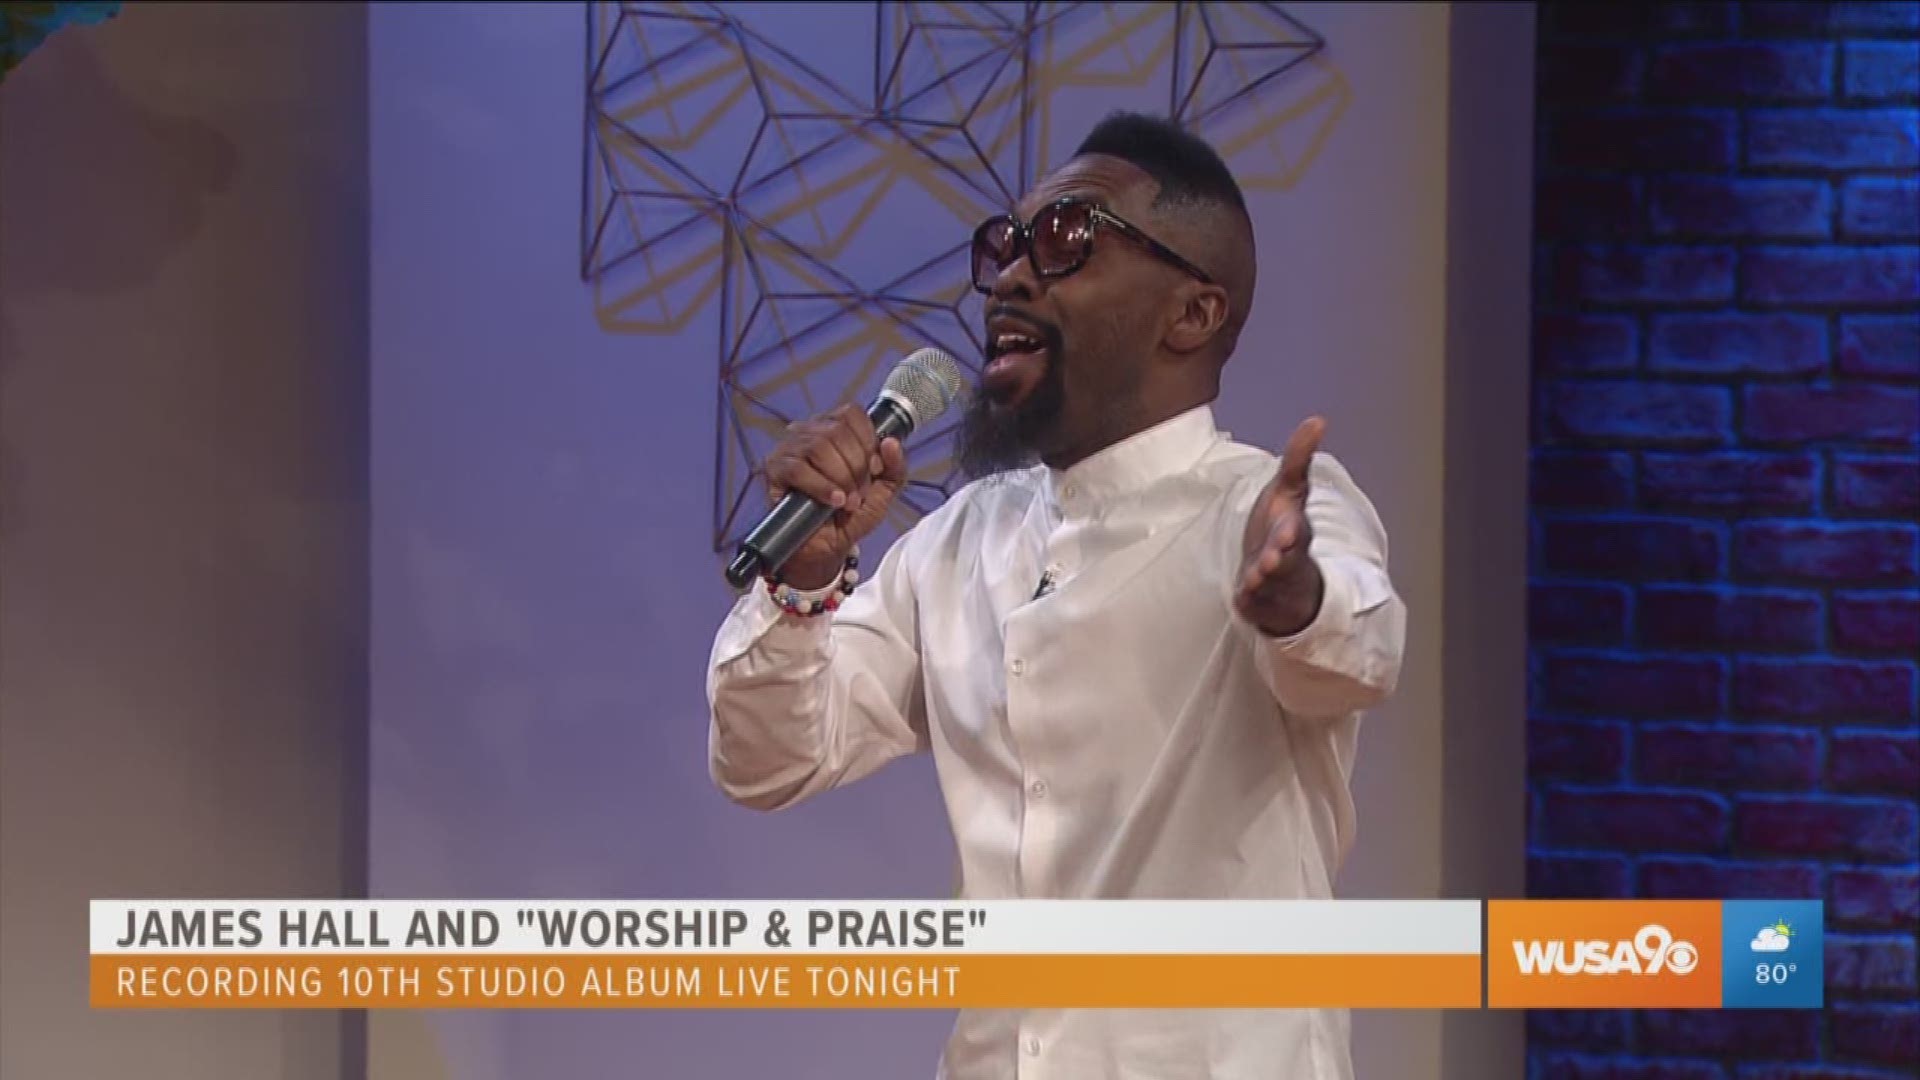 James Hall is a gospel singer with quite the voice. On the GDW stage, he performs a single that will be on his 10th album, "The New Era of the Old Time Way". To experience James Hall & Worship and Praise, they will be holding a live recording session of the 10th album at the Lincoln Theatre on July 29, 2019.